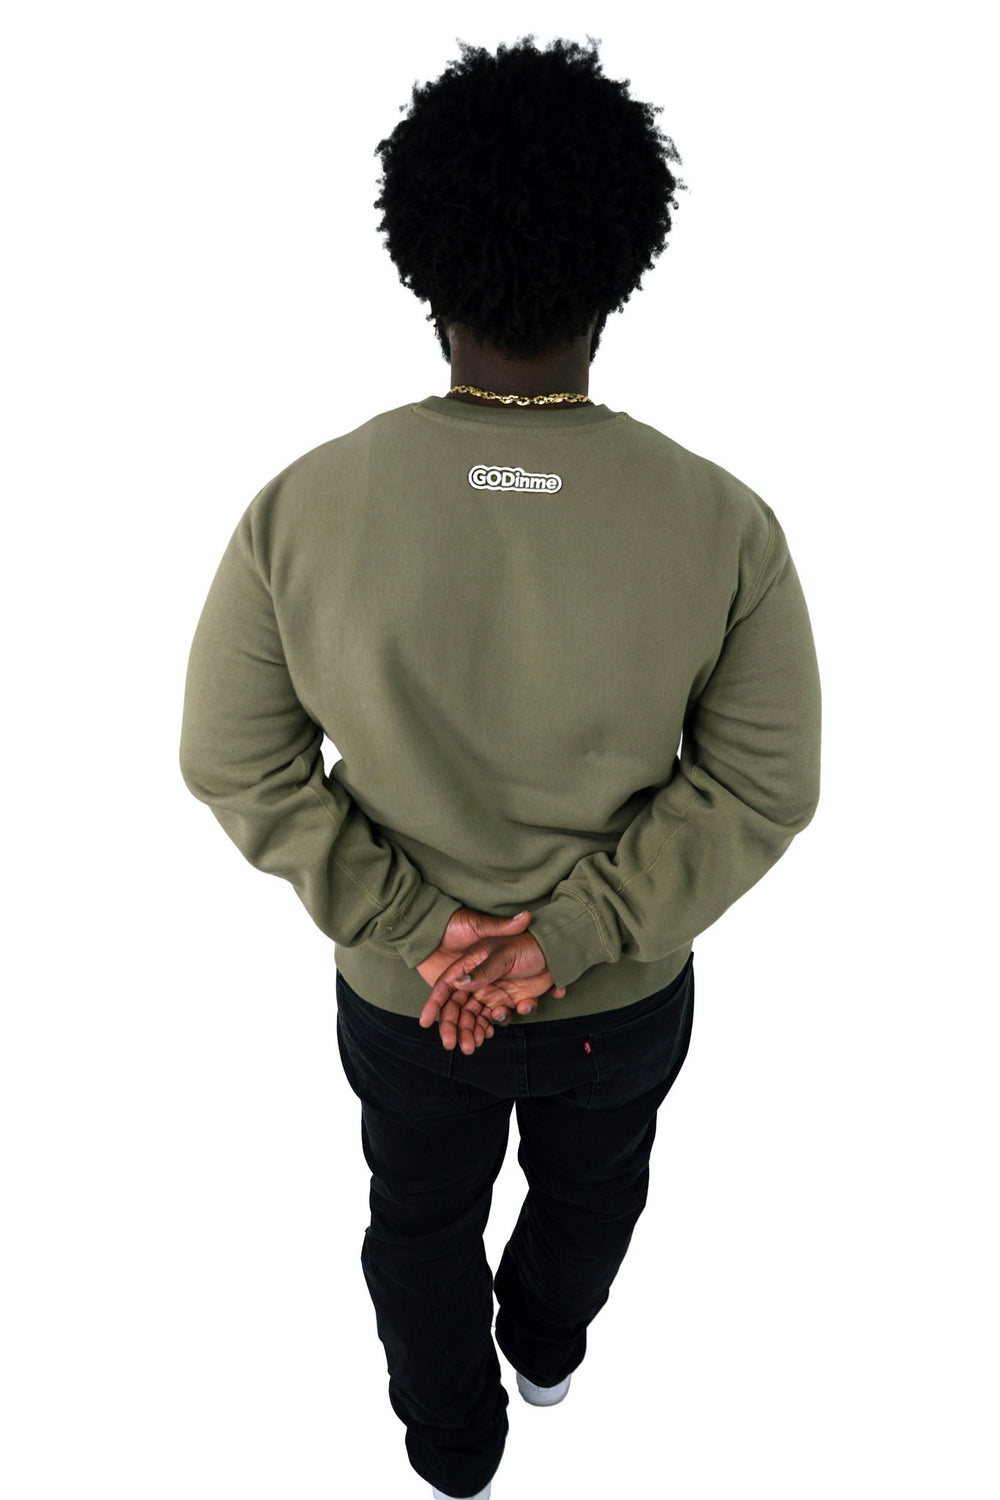 Luxury Olive Green Crewneck with premium cross grain design to ensure long-lasting comfort and wear. Featuring logo at left front and GODinme on the back.